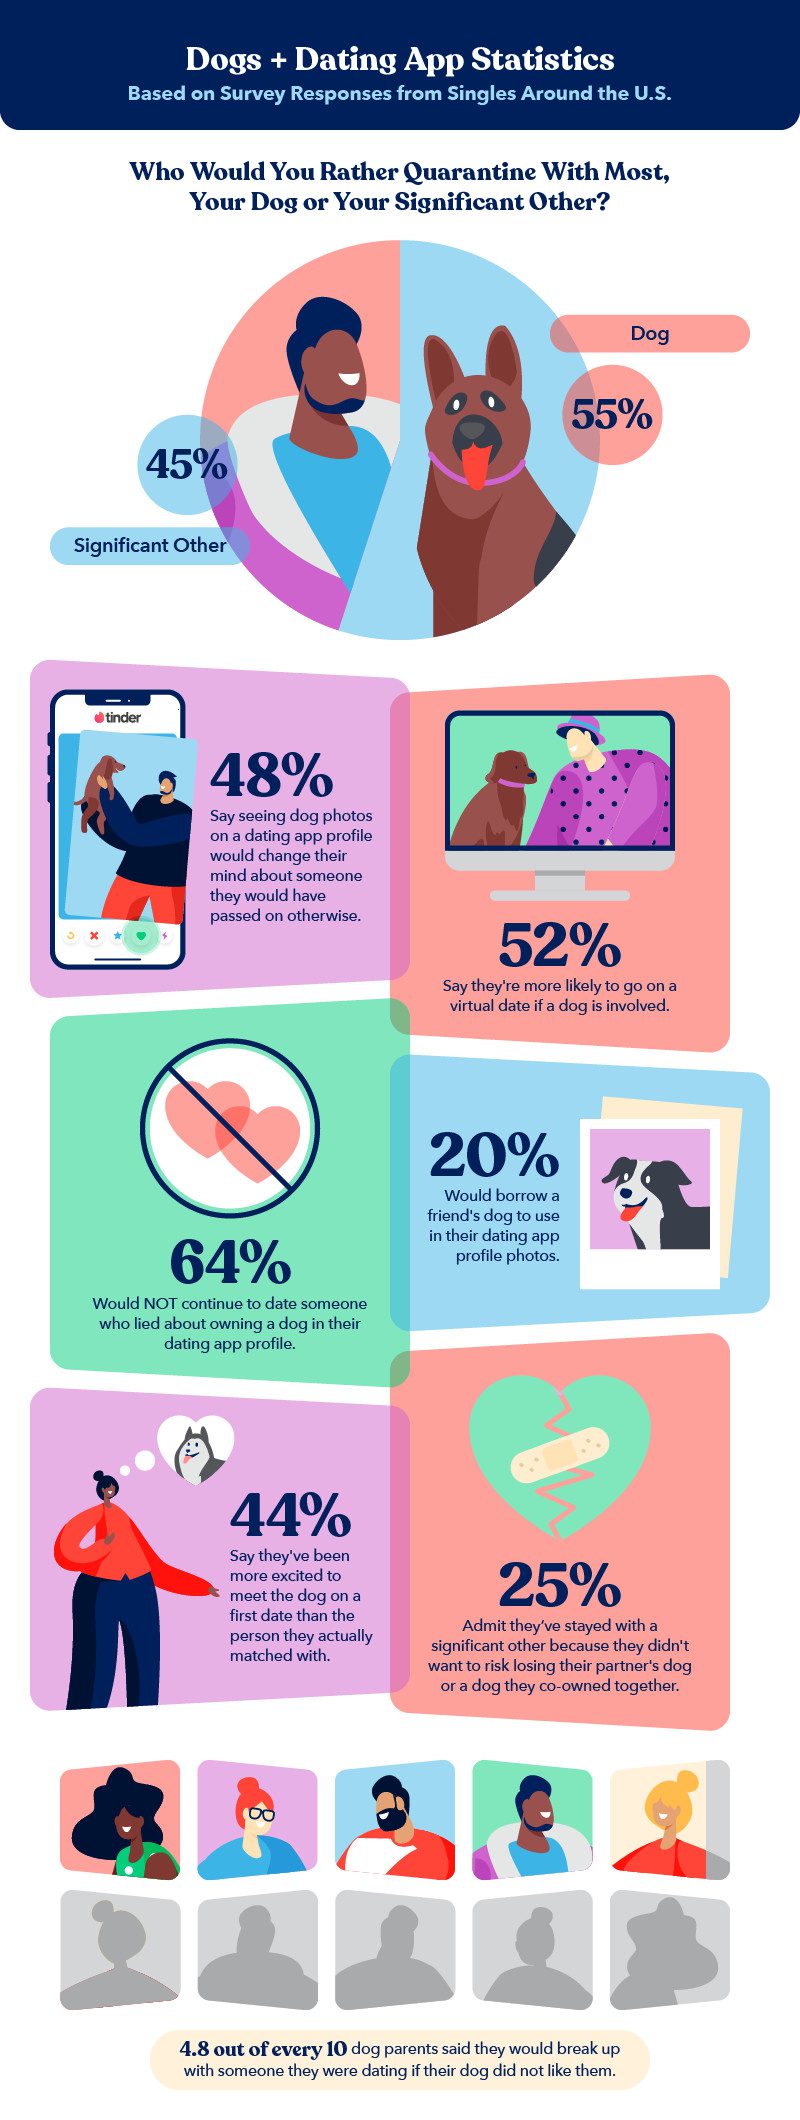 dogs and dating app statistics 